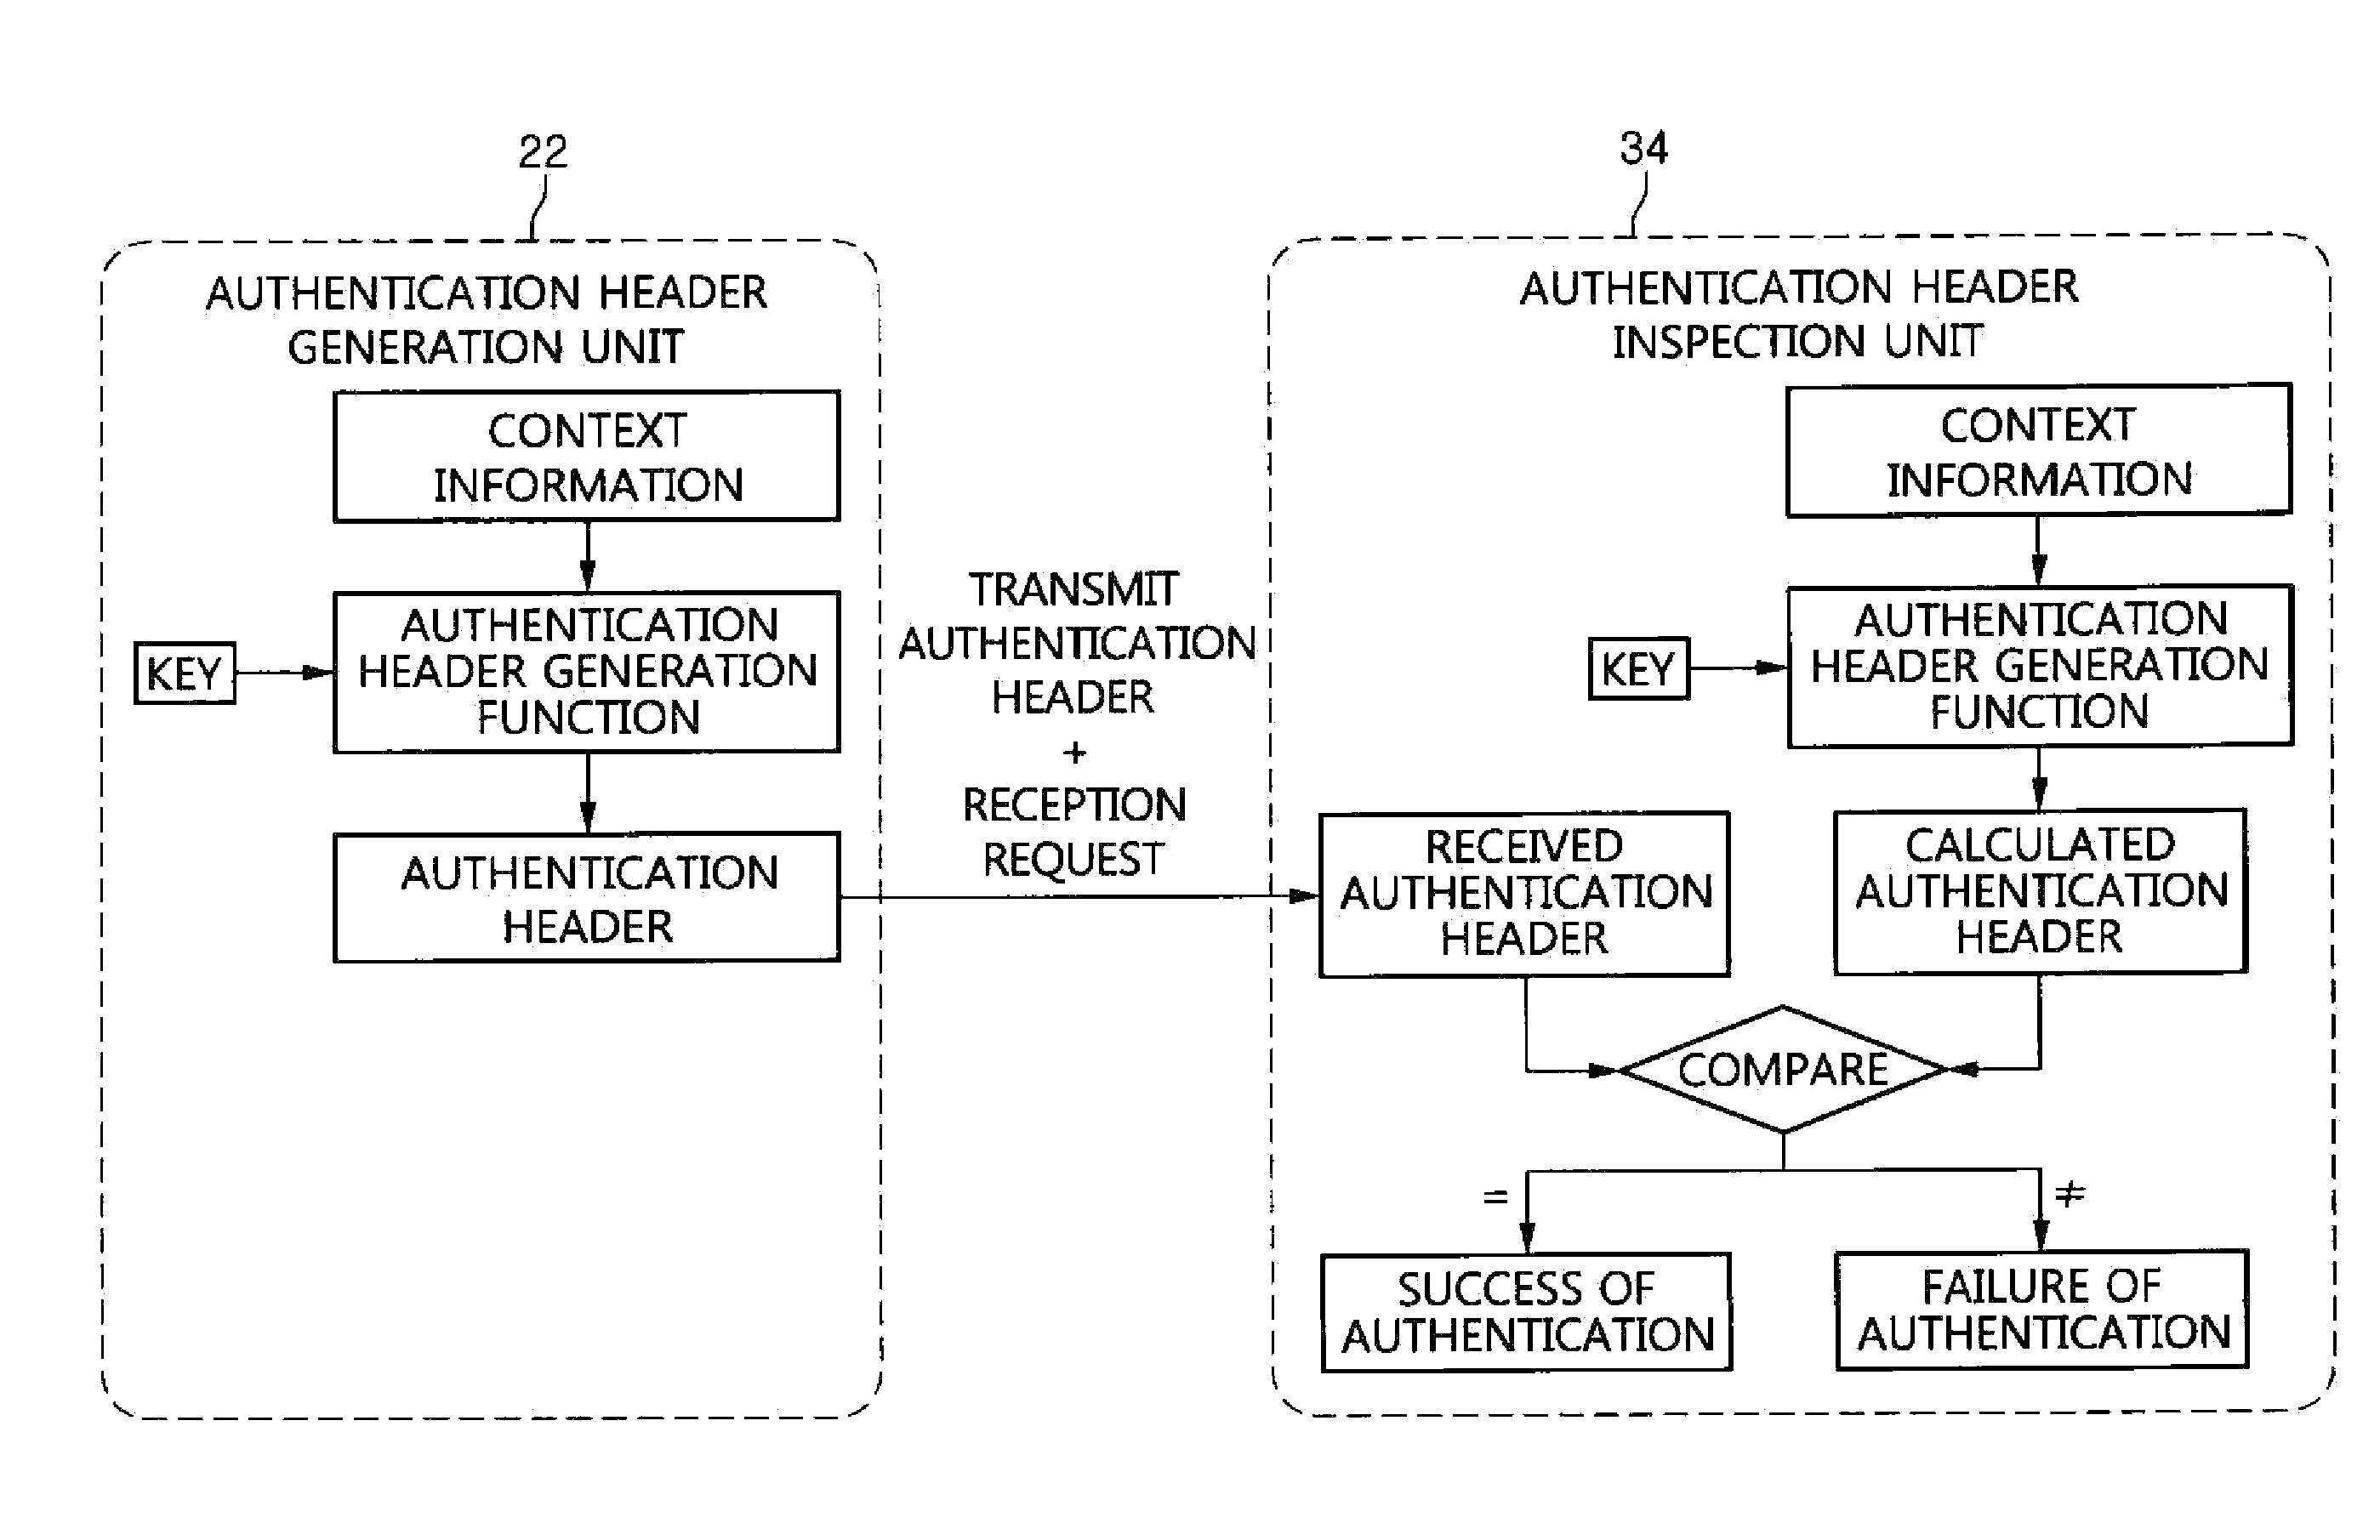 Apparatus, method and system for context-aware security control in cloud environment